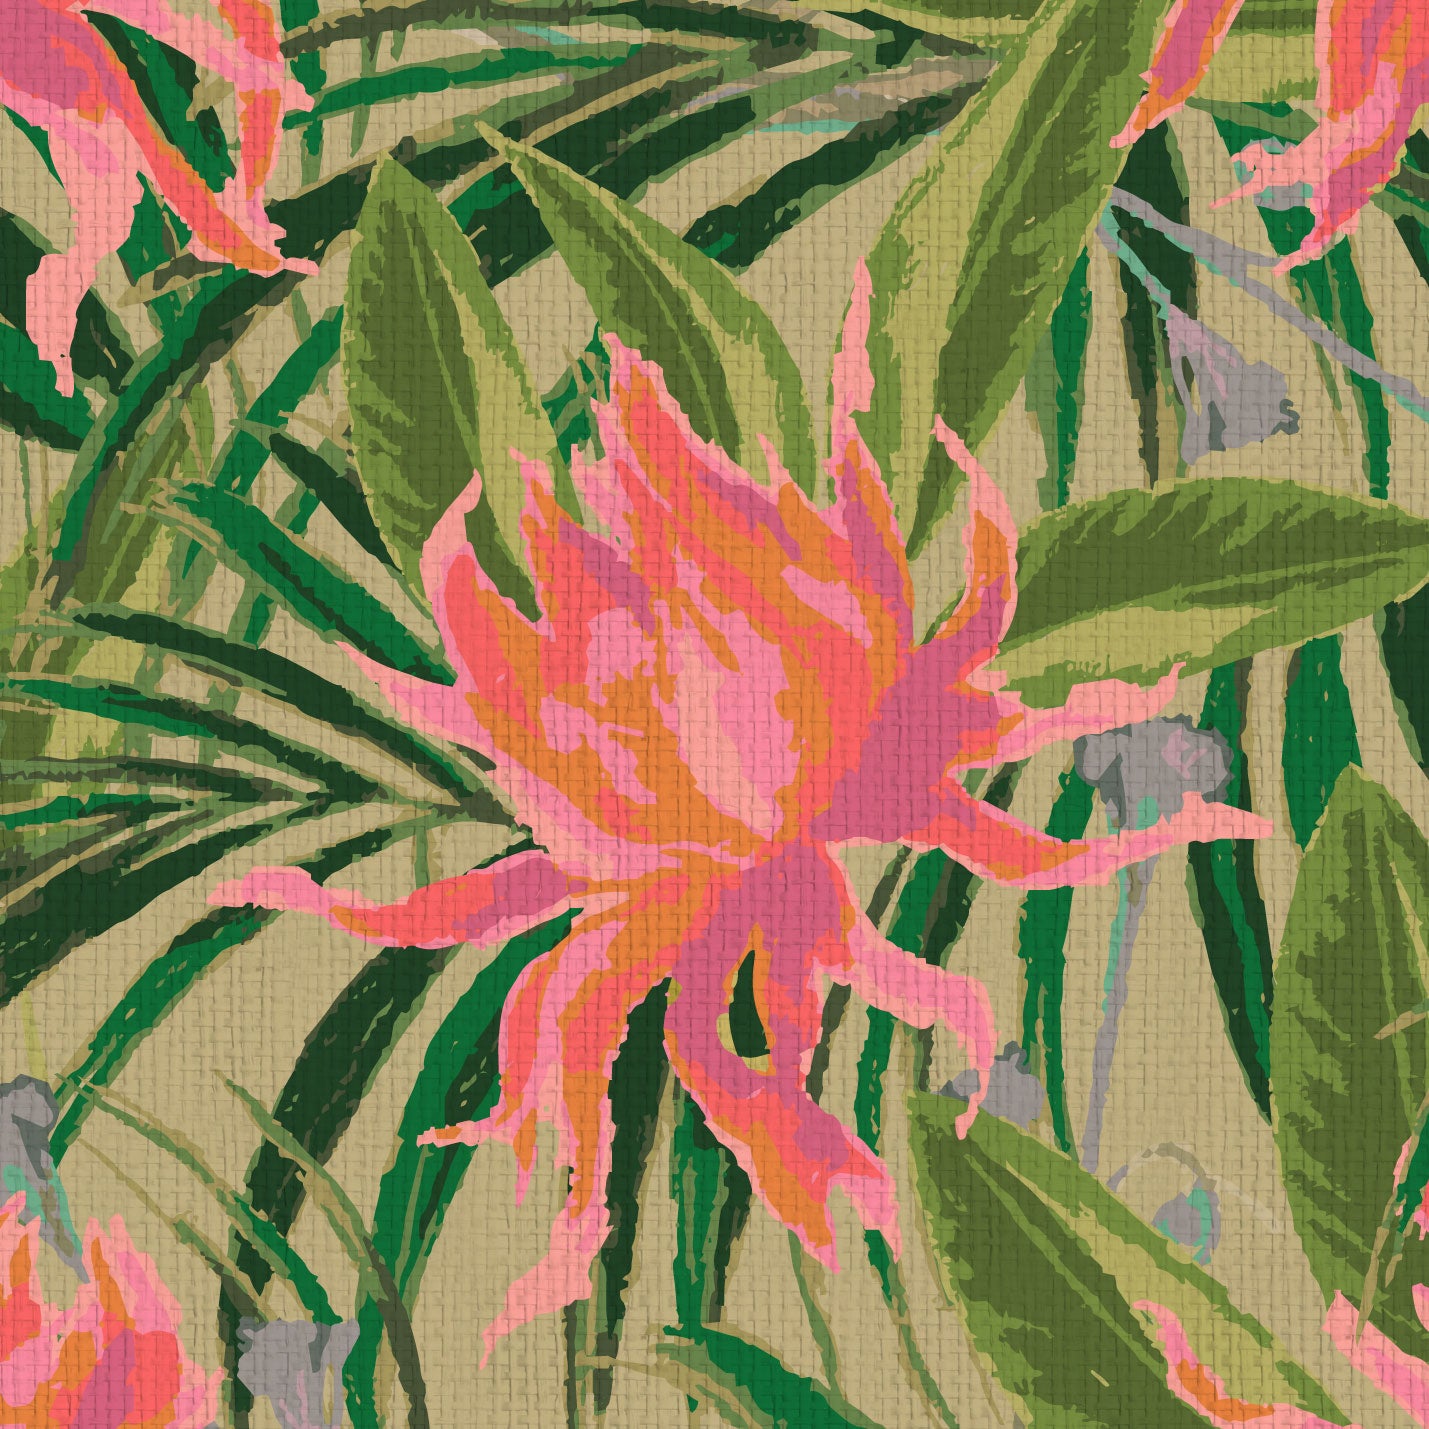 wallpaper with olive green based featuring oversized painterly tropical flowers and palm leafs in striking shades of pink and orange and leafs in shades of bright green Natural Textured Eco-Friendly Non-toxic High-quality Sustainable Interior Design Bold Custom Tailor-made Retro chic Tropical Jungle Coastal preppy Garden Seaside Coastal Seashore Waterfront Vacation home styling Retreat Relaxed beach vibes Beach cottage Shoreline Oceanfront botanical palm leaf paperweave paper weave